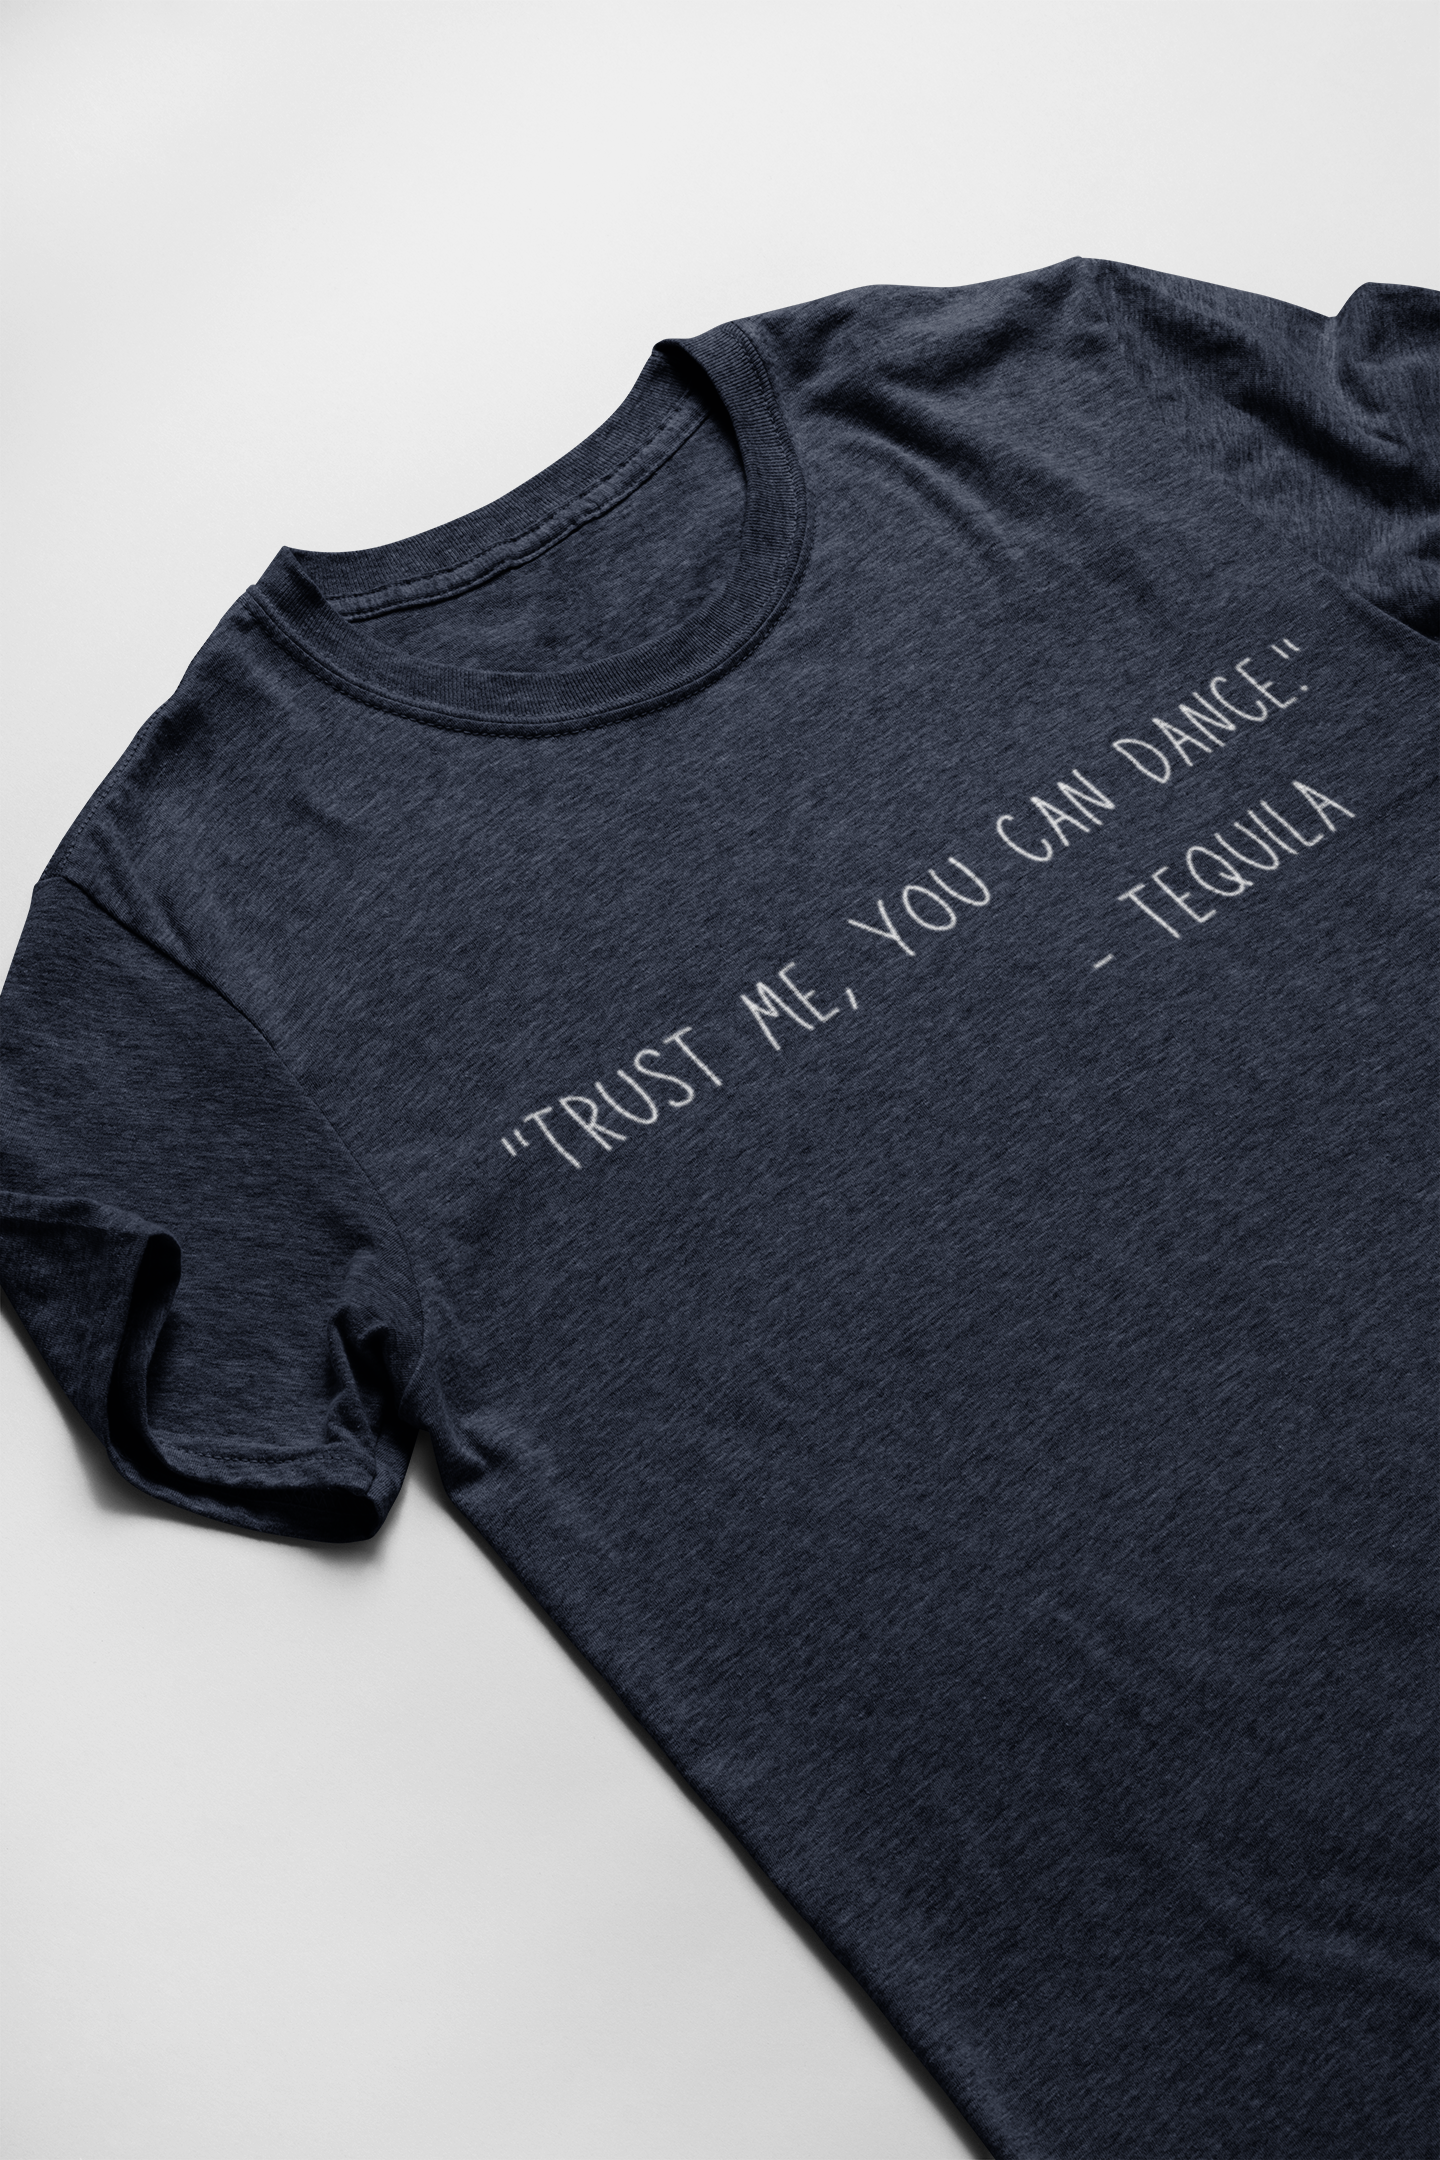 Trust Me, You Can Dance Tee